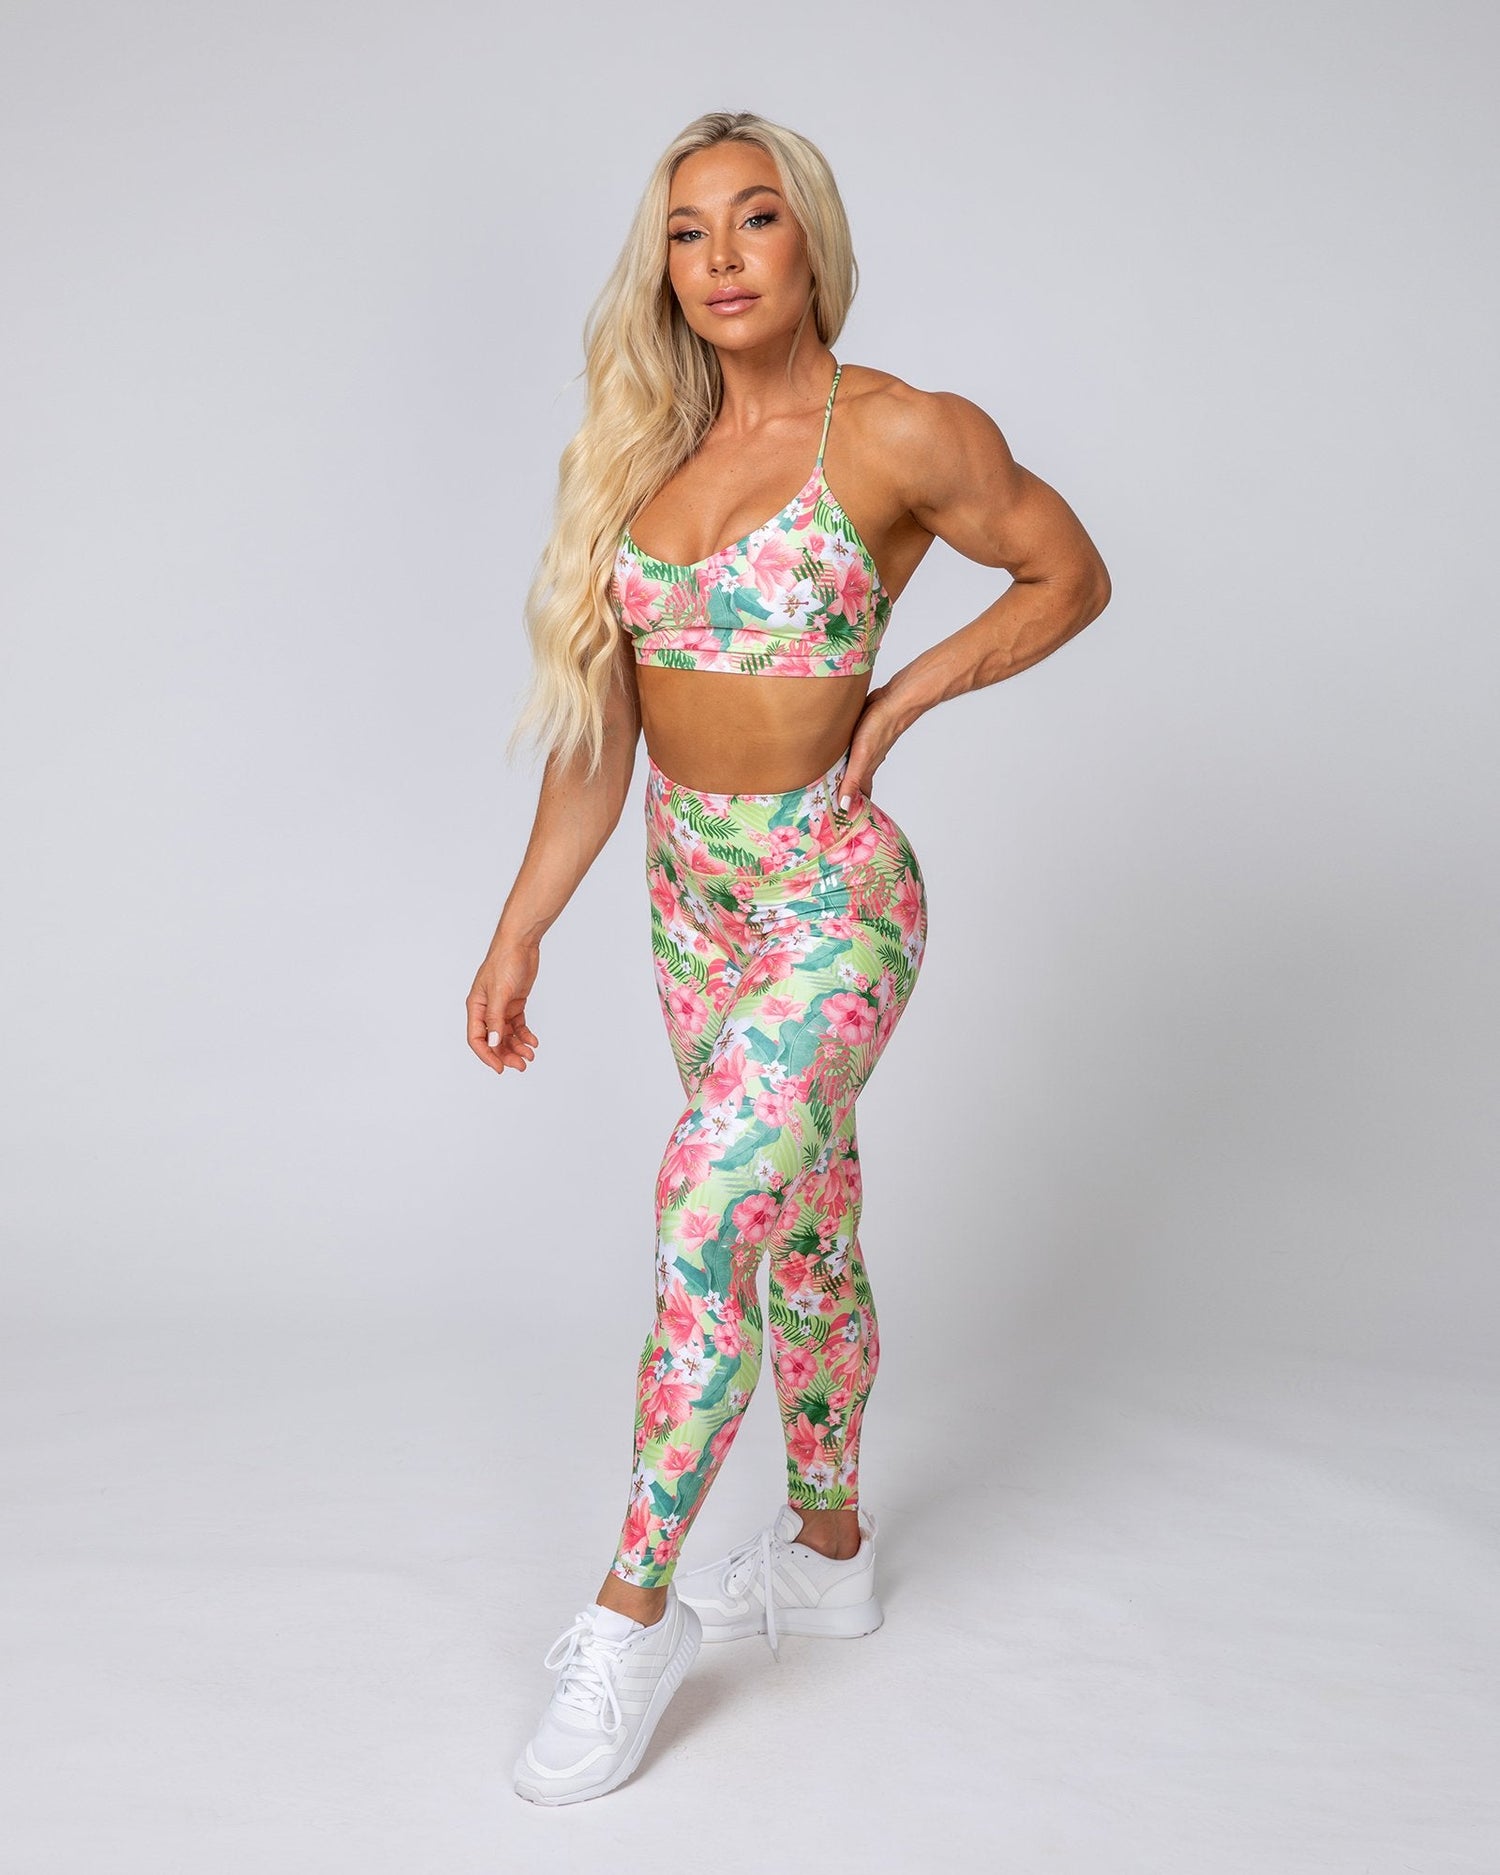 HBxMN Sweetheart Ankle Length Leggings - Tropical Floral